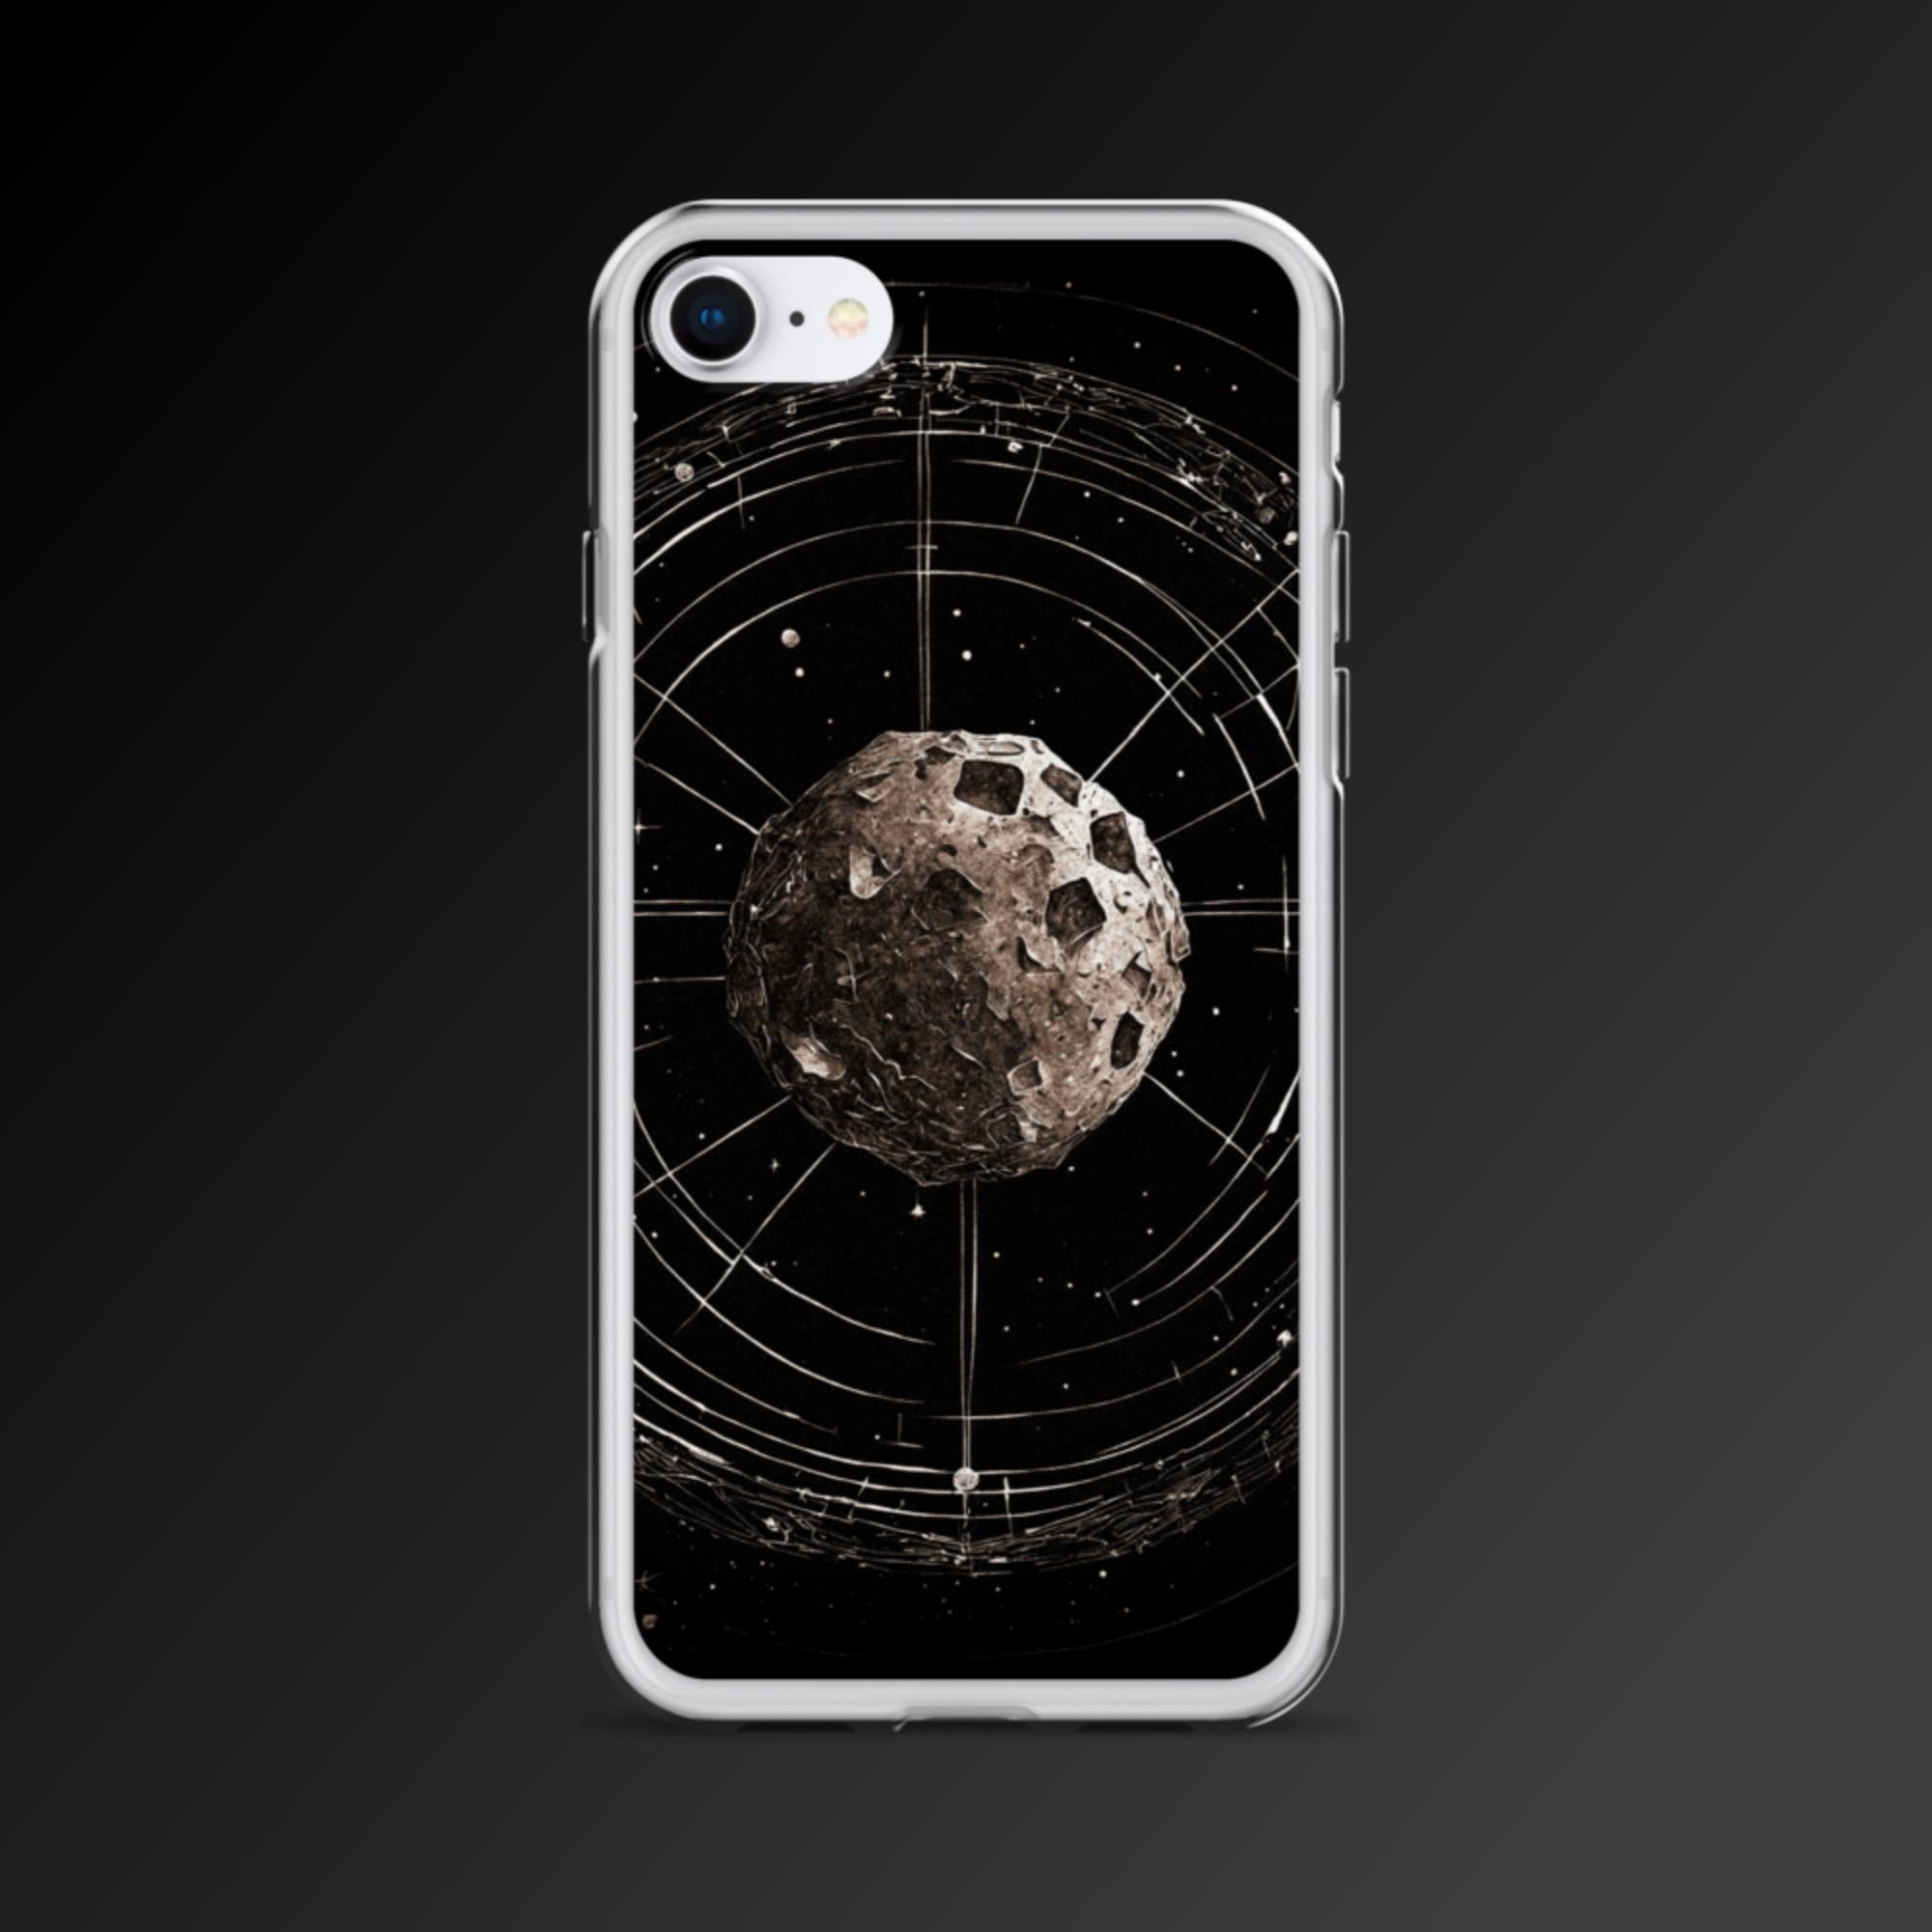 "Lunar space station" clear iphone case - Clear iphone case - Ever colorful